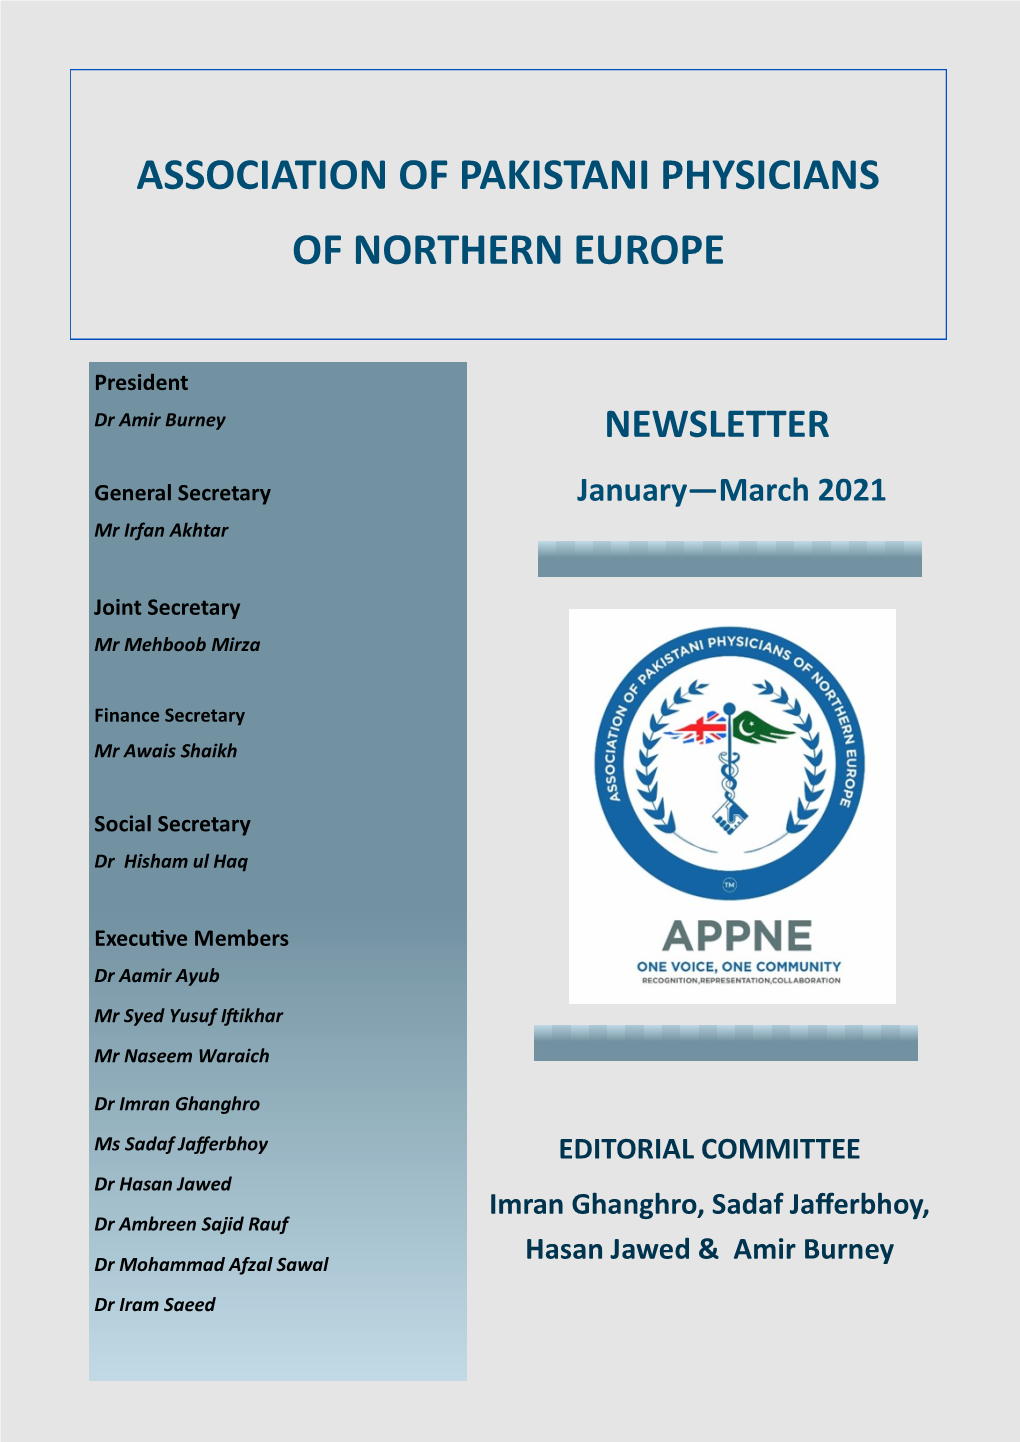 Association of Pakistani Physicians of Northern Europe